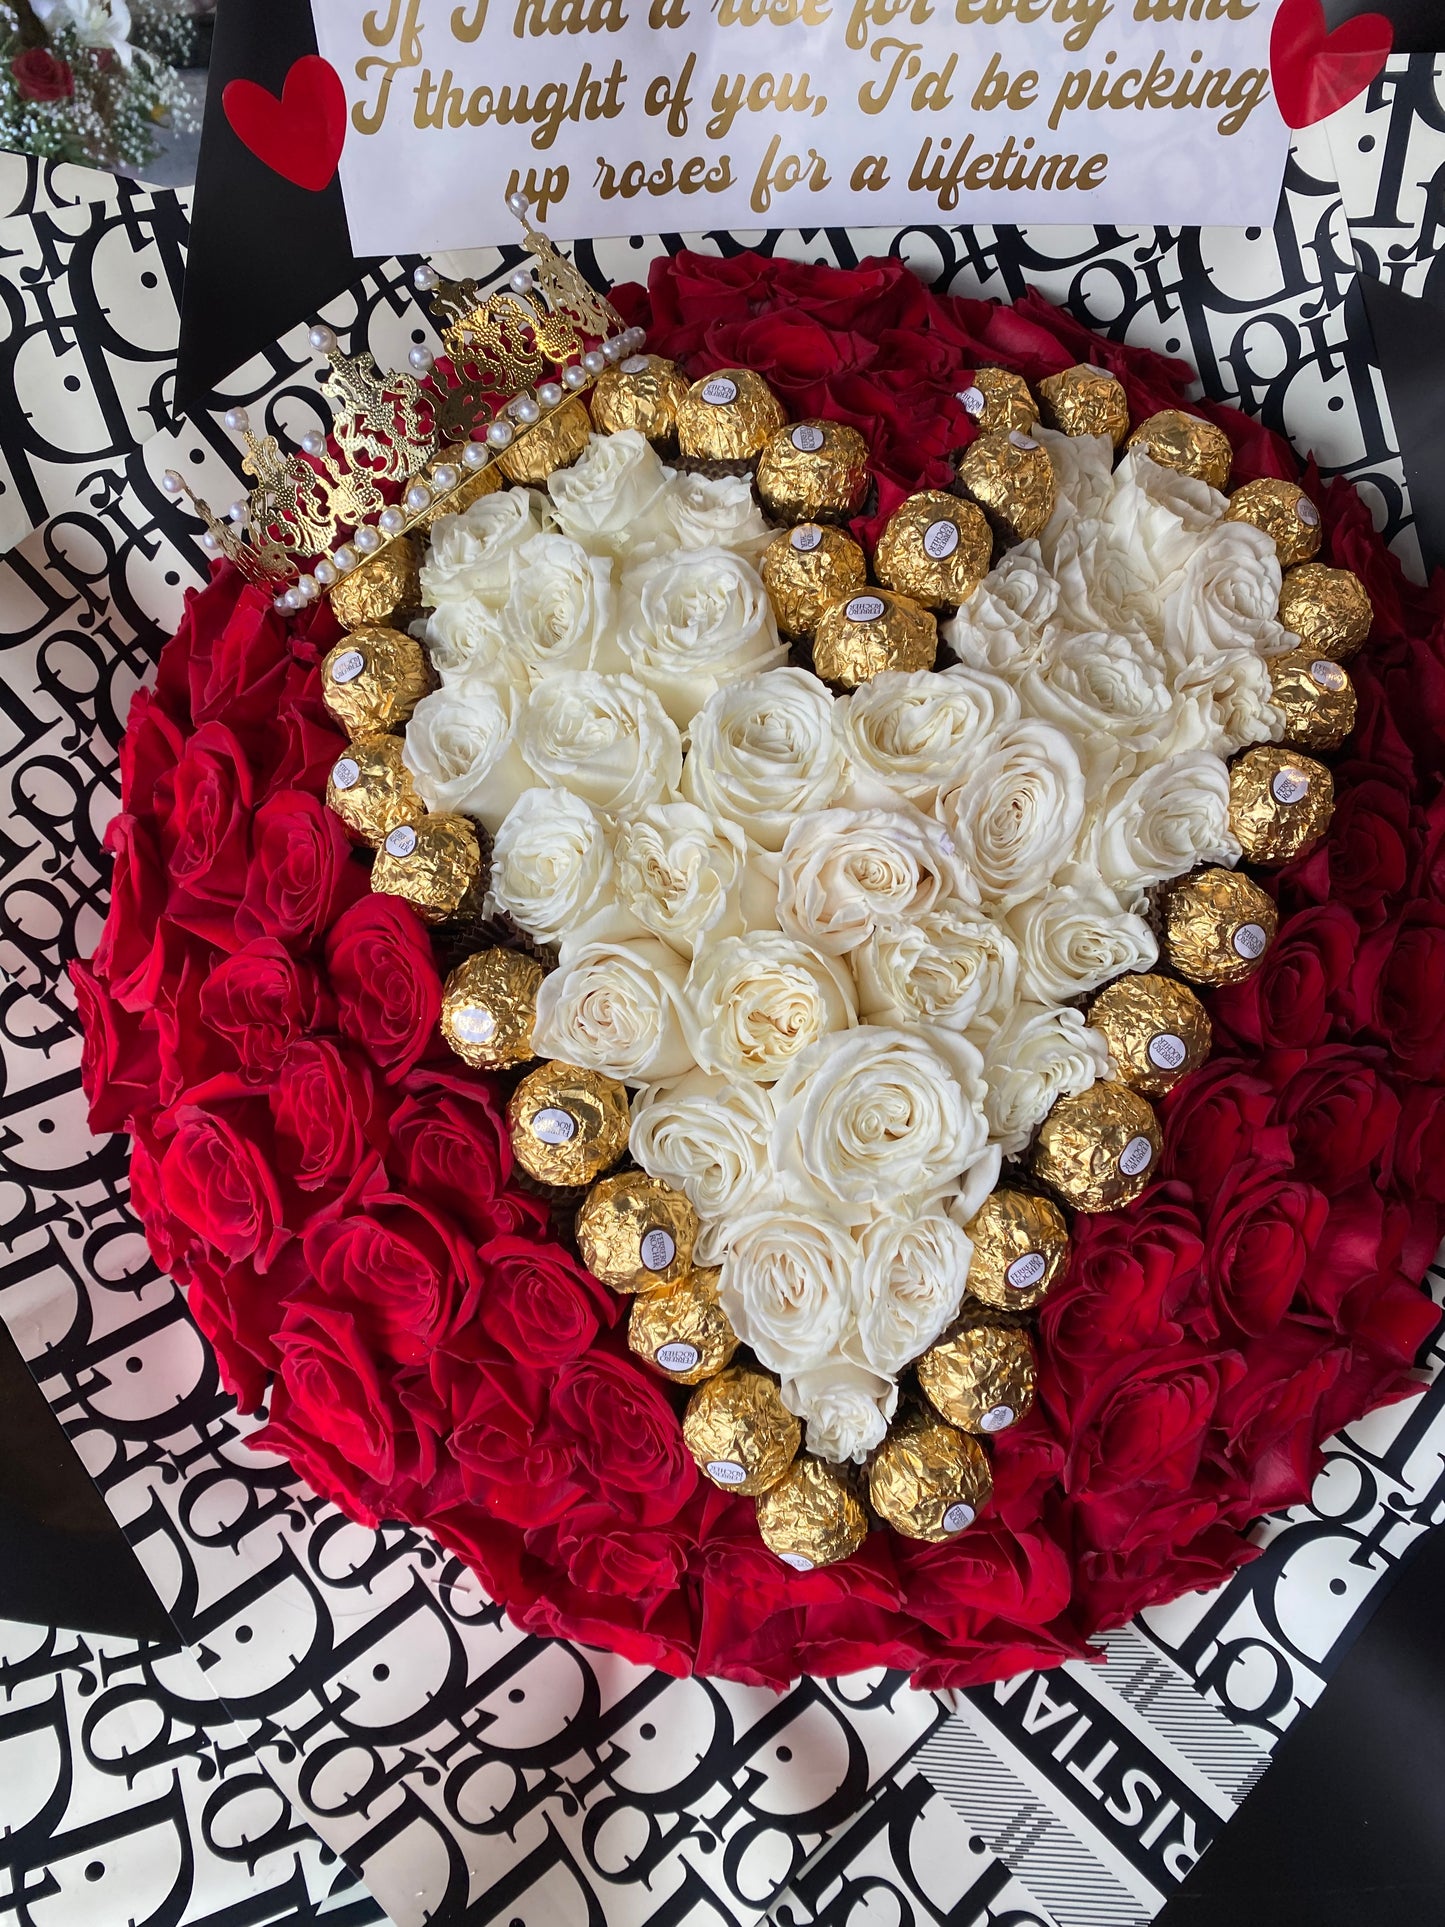 100 Heart Chocolate Rose Deluxe❤️